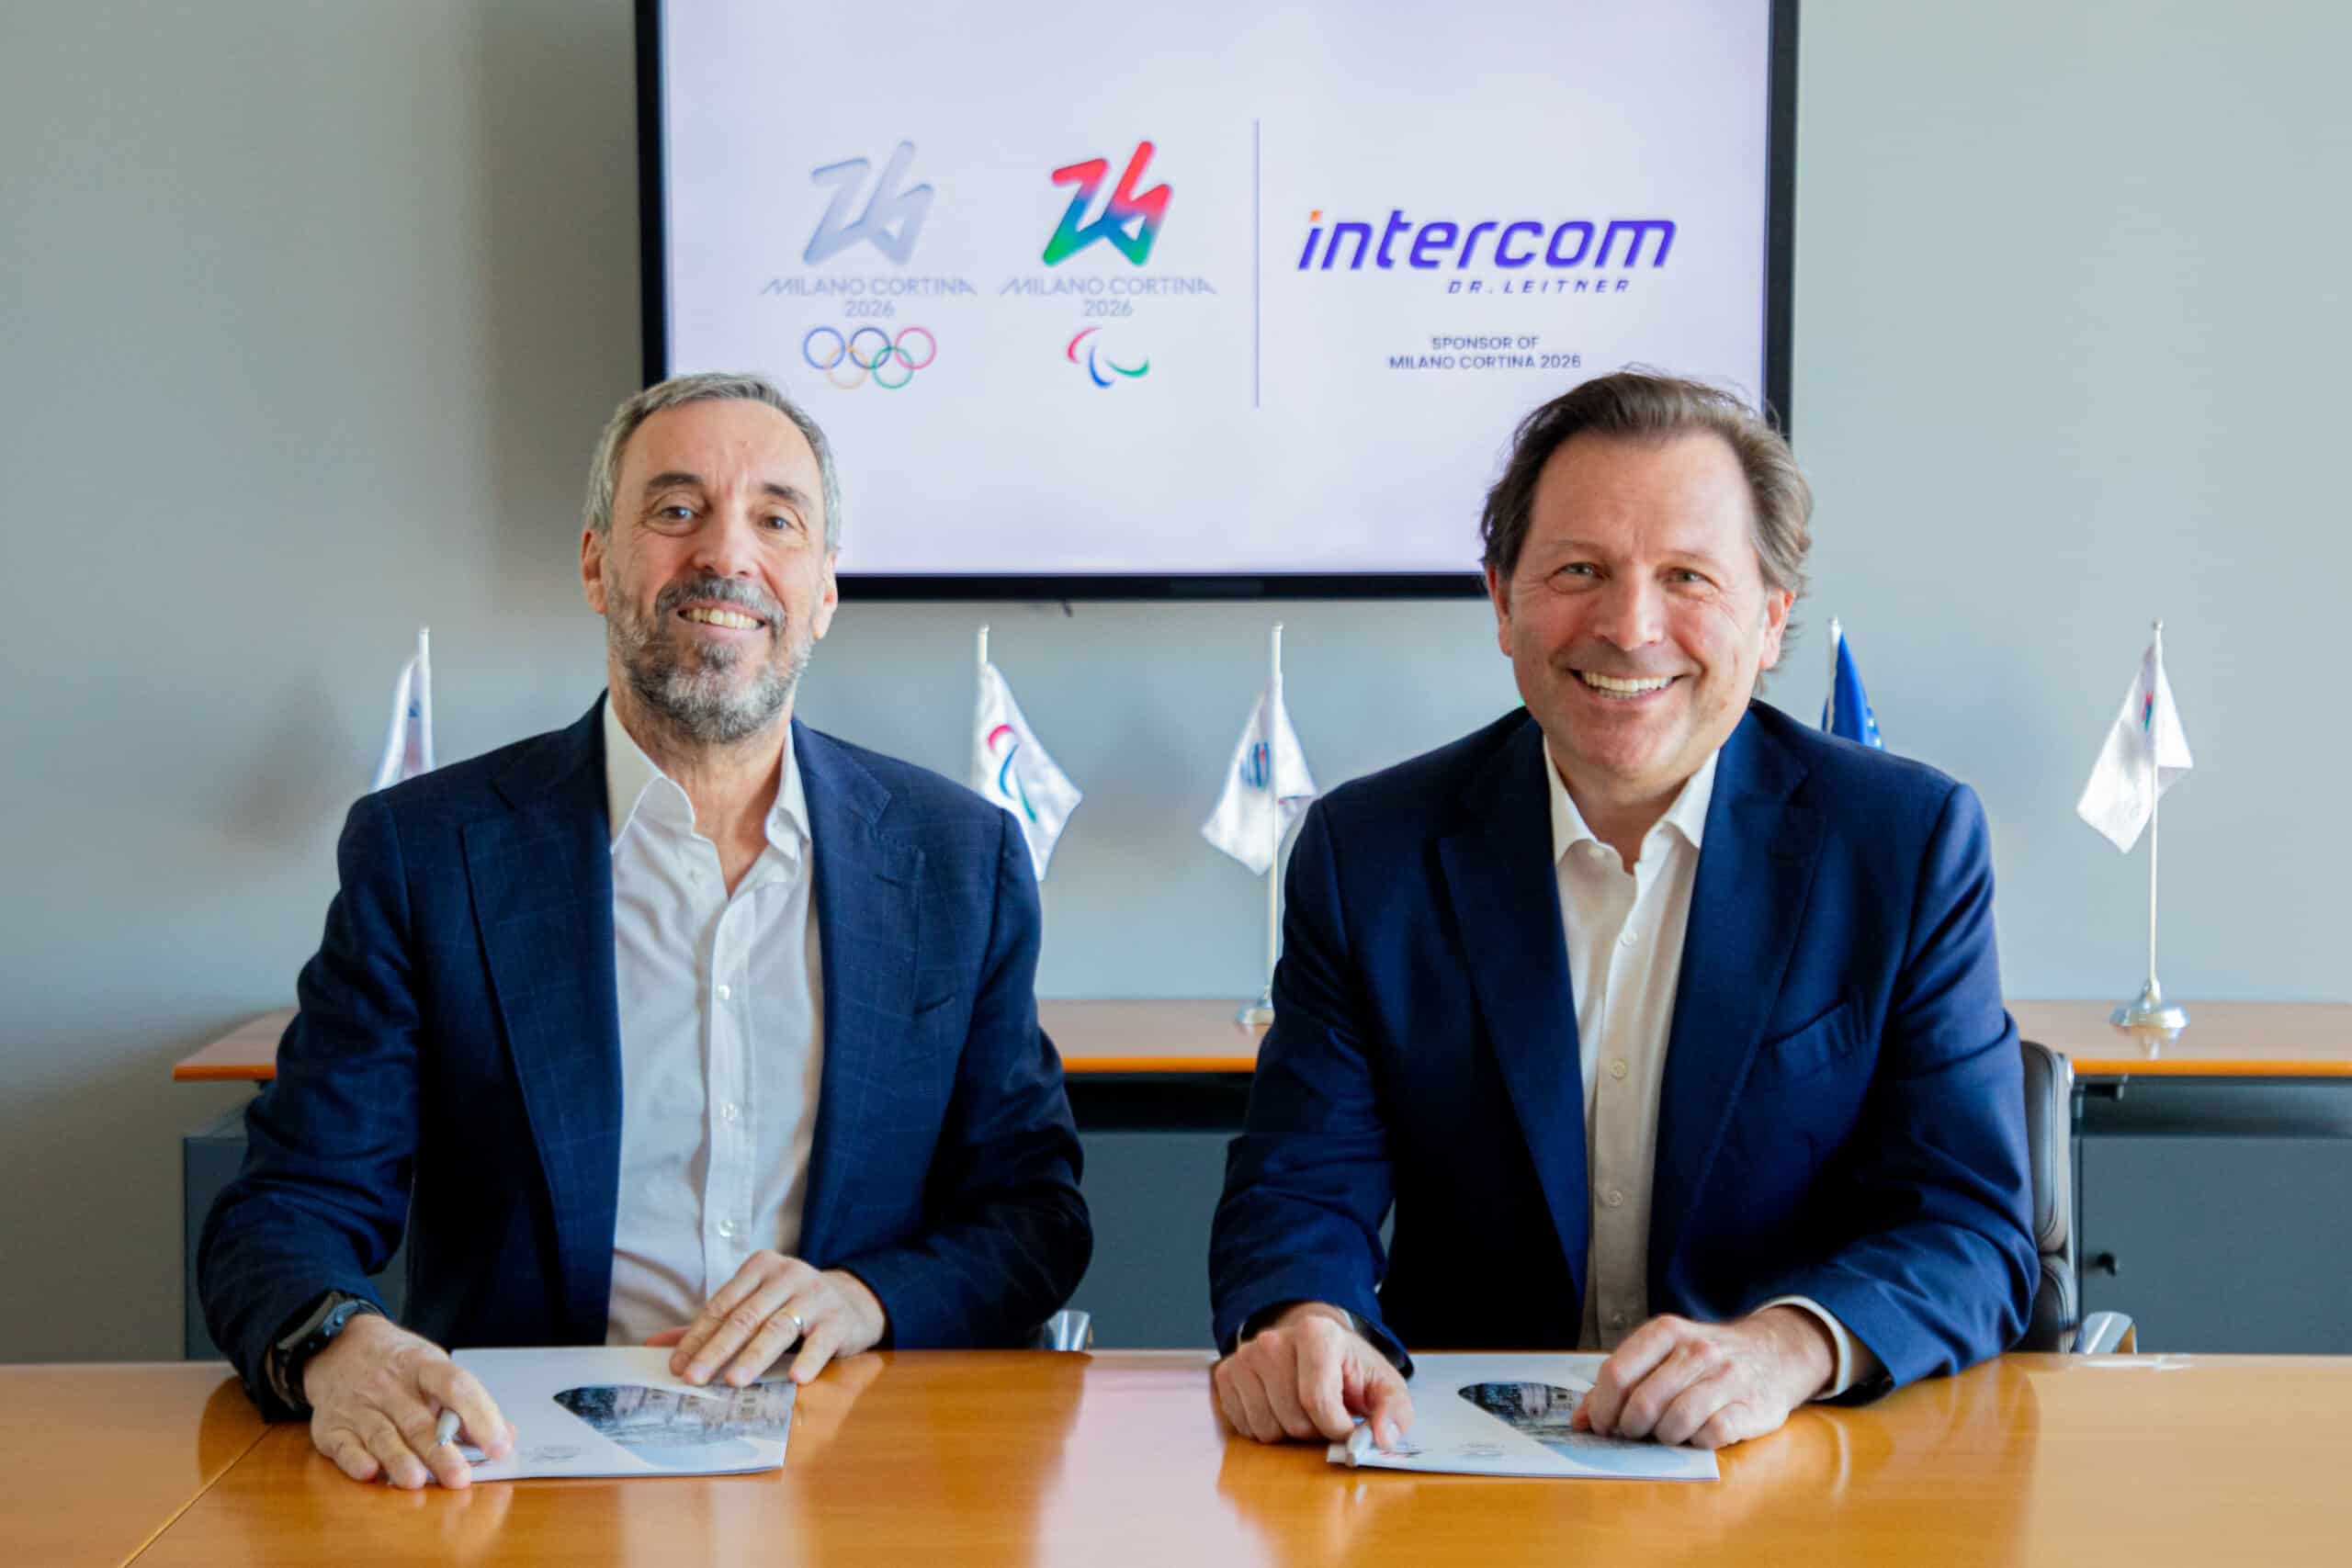 🇮🇹 Official sponsor of the 2026 Winter Olympics in Milano Cortina